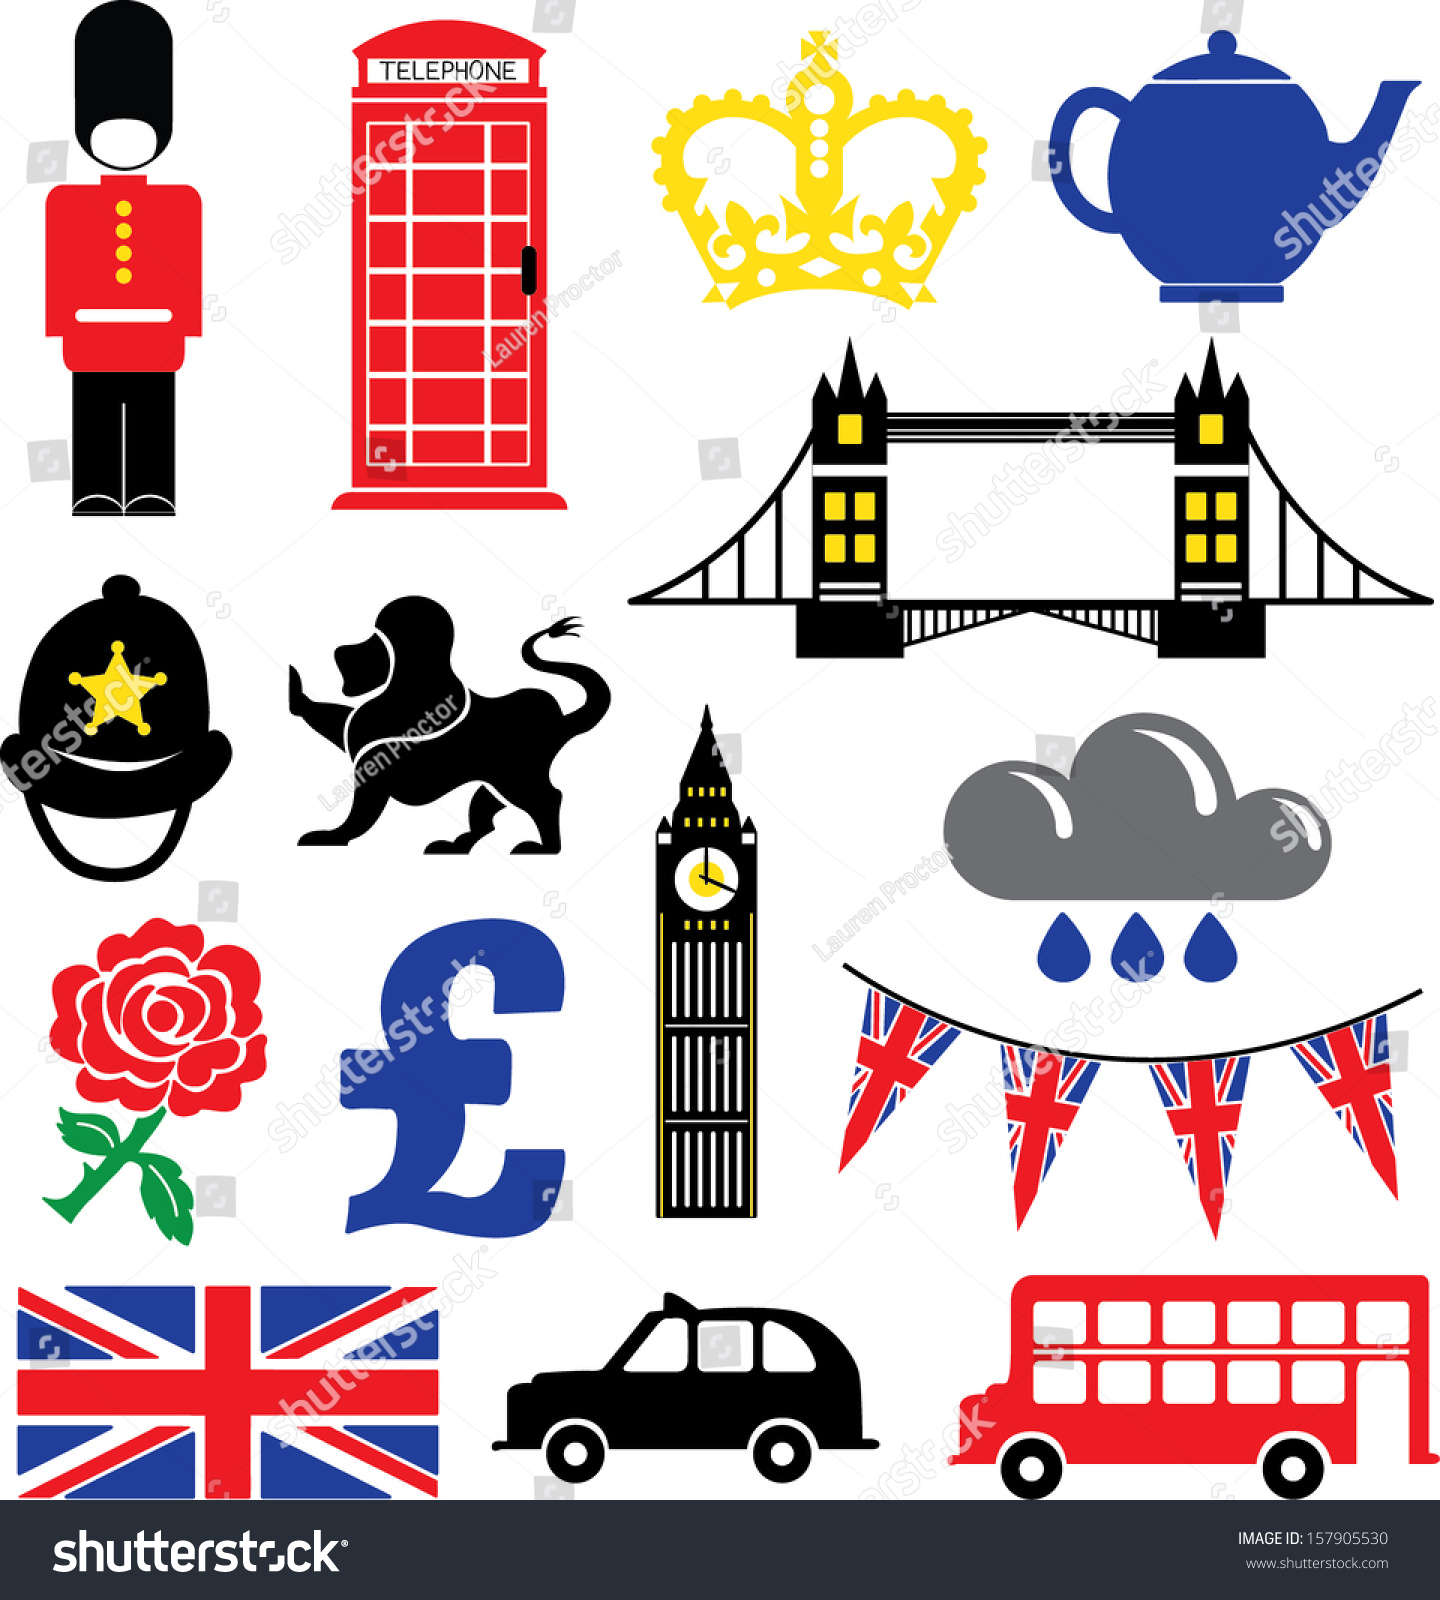 british clipart collection - photo #11